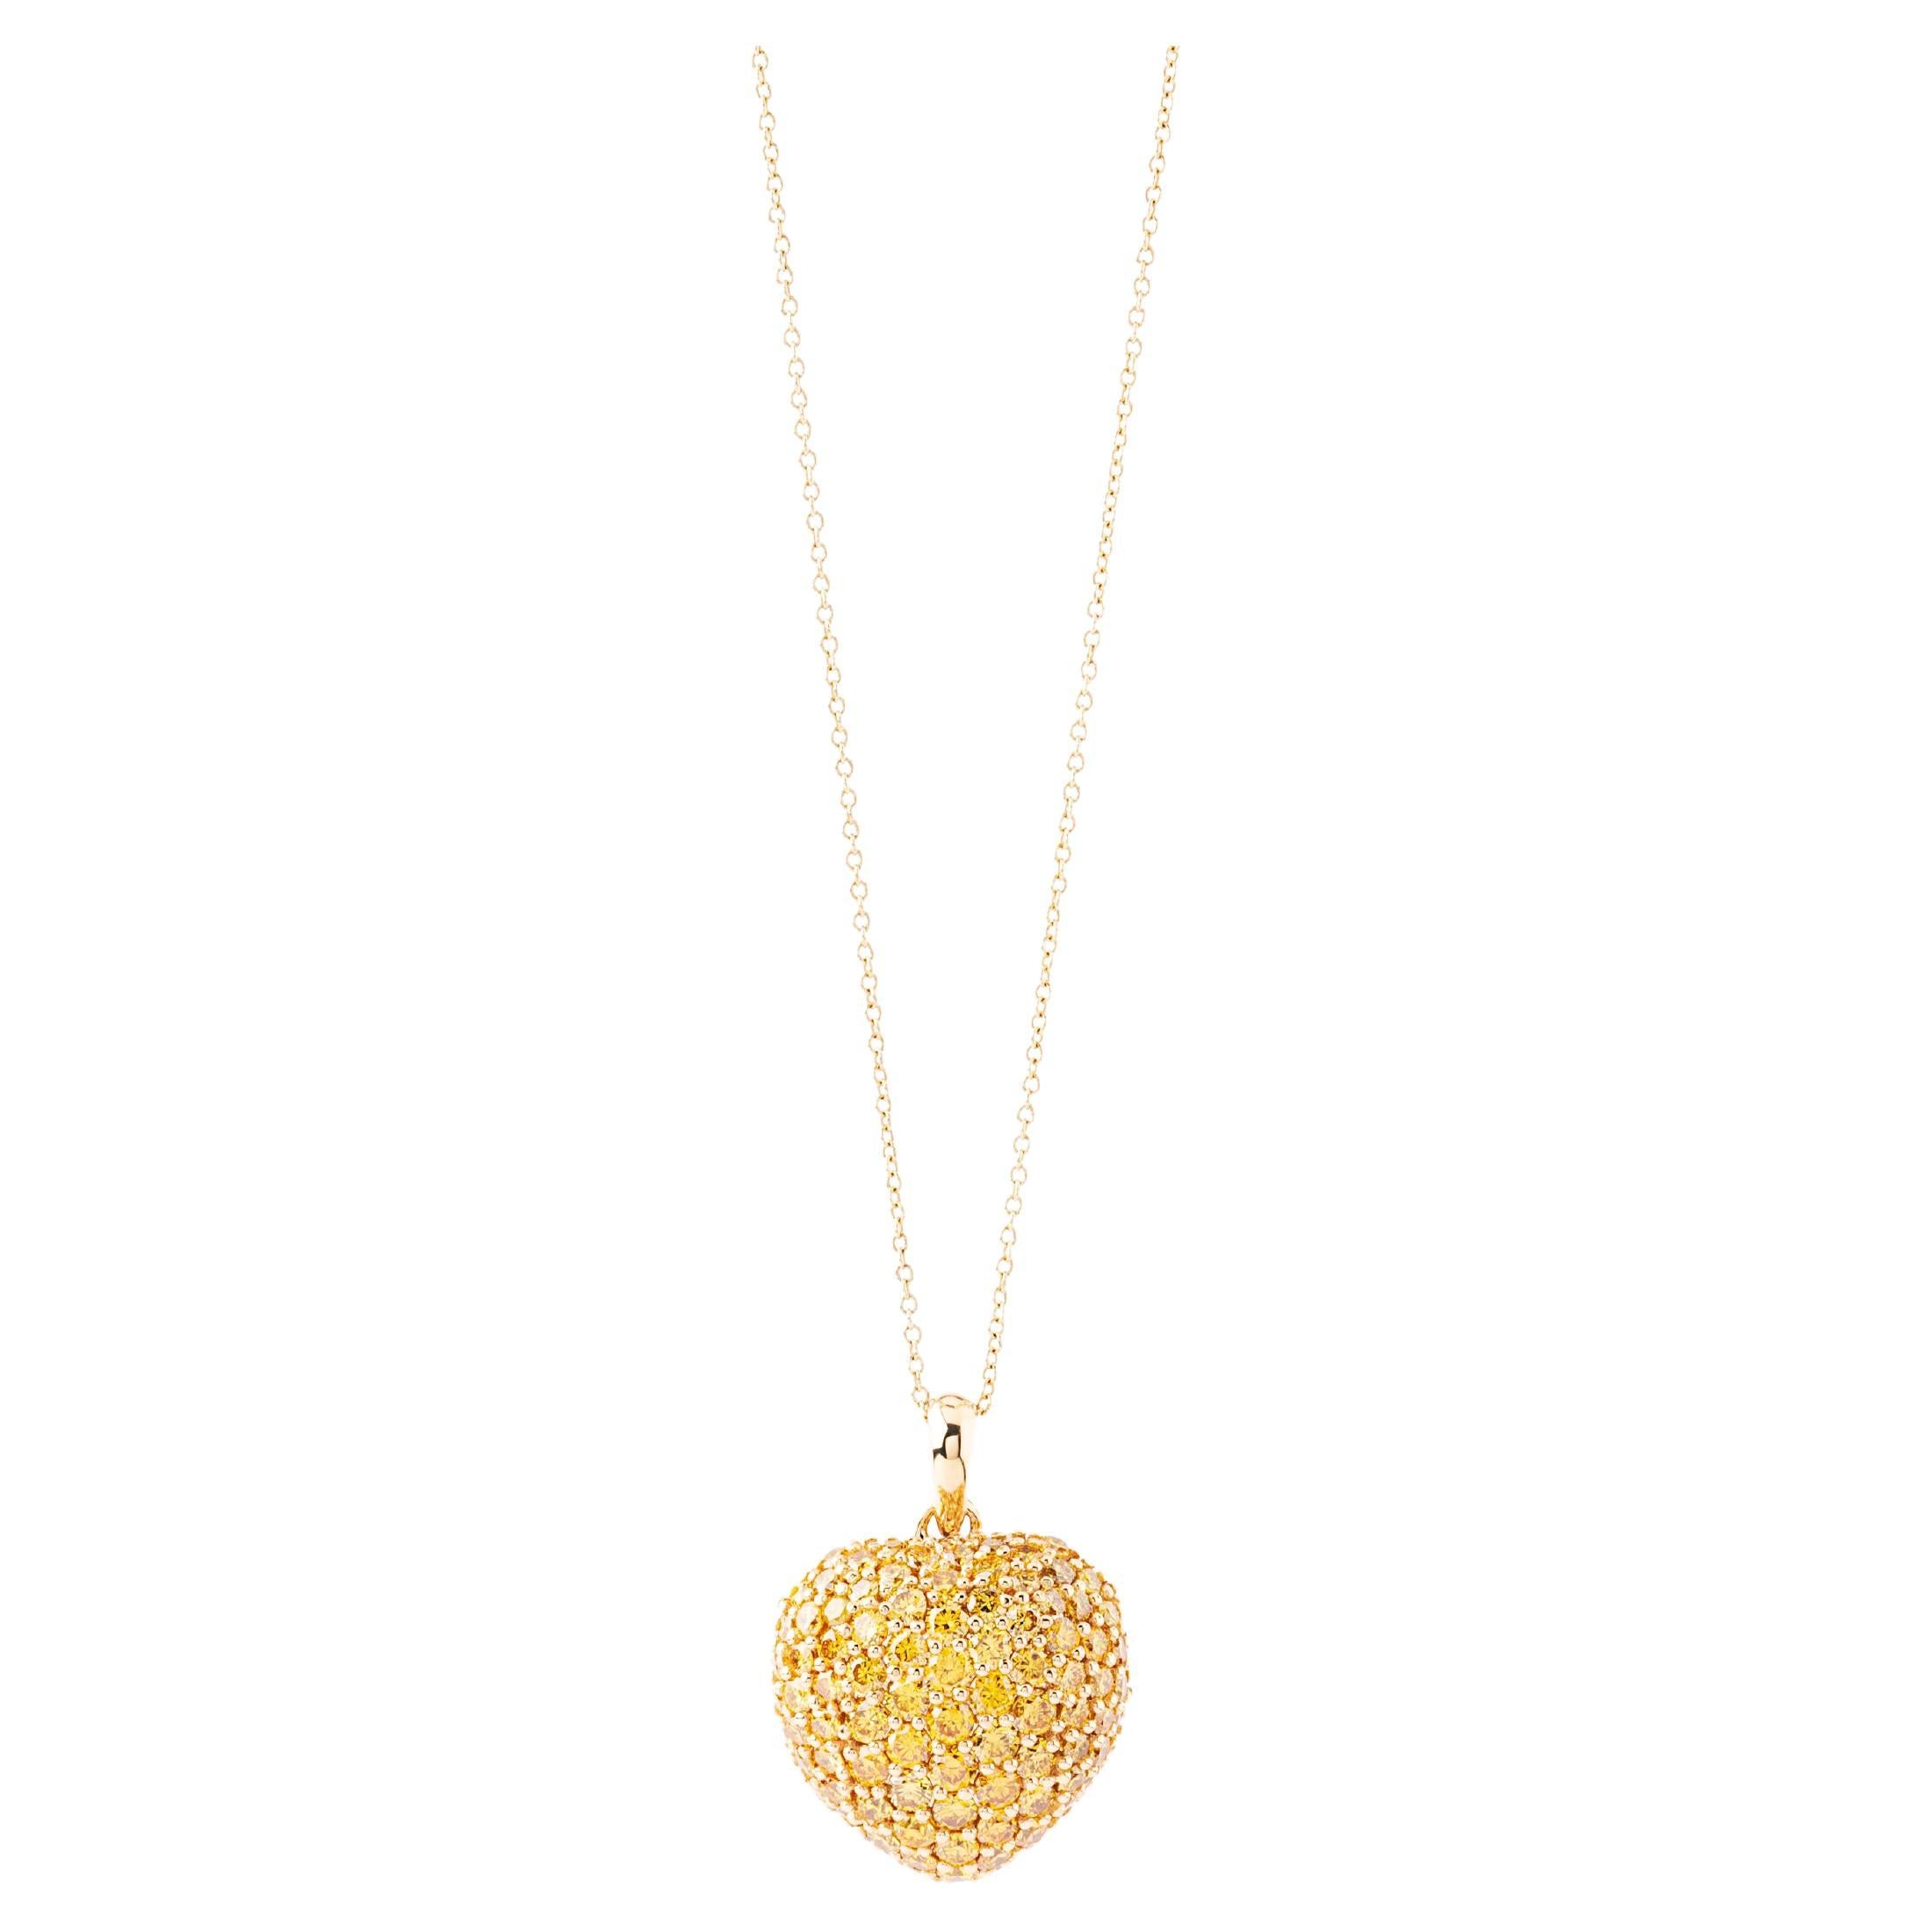 Handcrafted 18k Gold Pendant, with Fancy Vivid Yellow Diamonds of the highest quality. Natural without any treatment. The pendant or necklace enhancer is made of 10 grams 18k gold. The canary yellow diamonds are hand set on the heart and shine